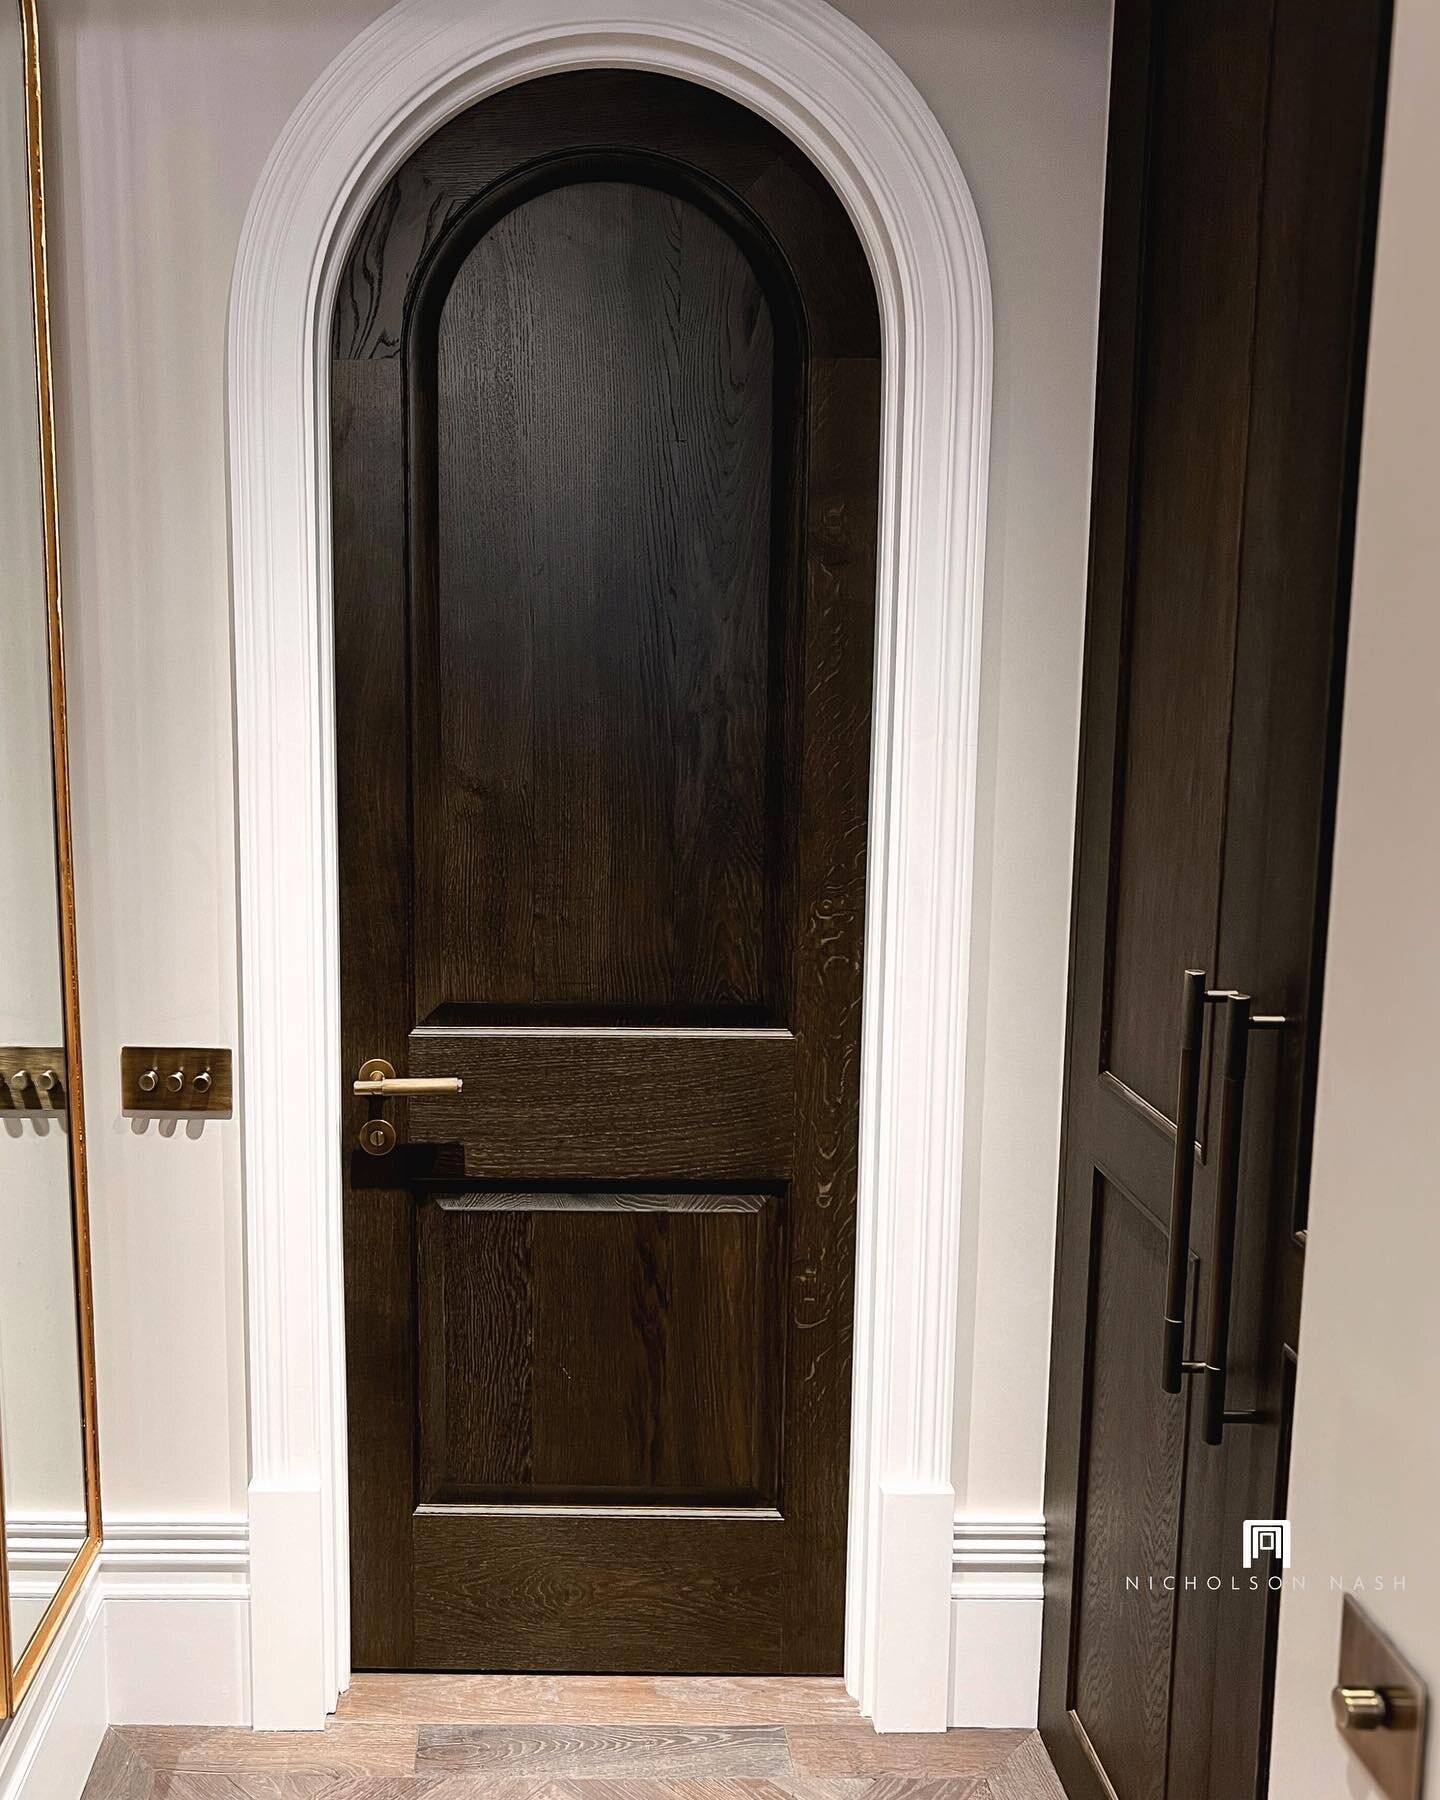 Curve appeal &bull; This doorway is not your average entrance; it has a unique twist. An impactful feature; this stylishly crafted bespoke door adds sophistication and whimsy to our clients home 🚪

Work by us @nicholsonnashfurniture in collaboration